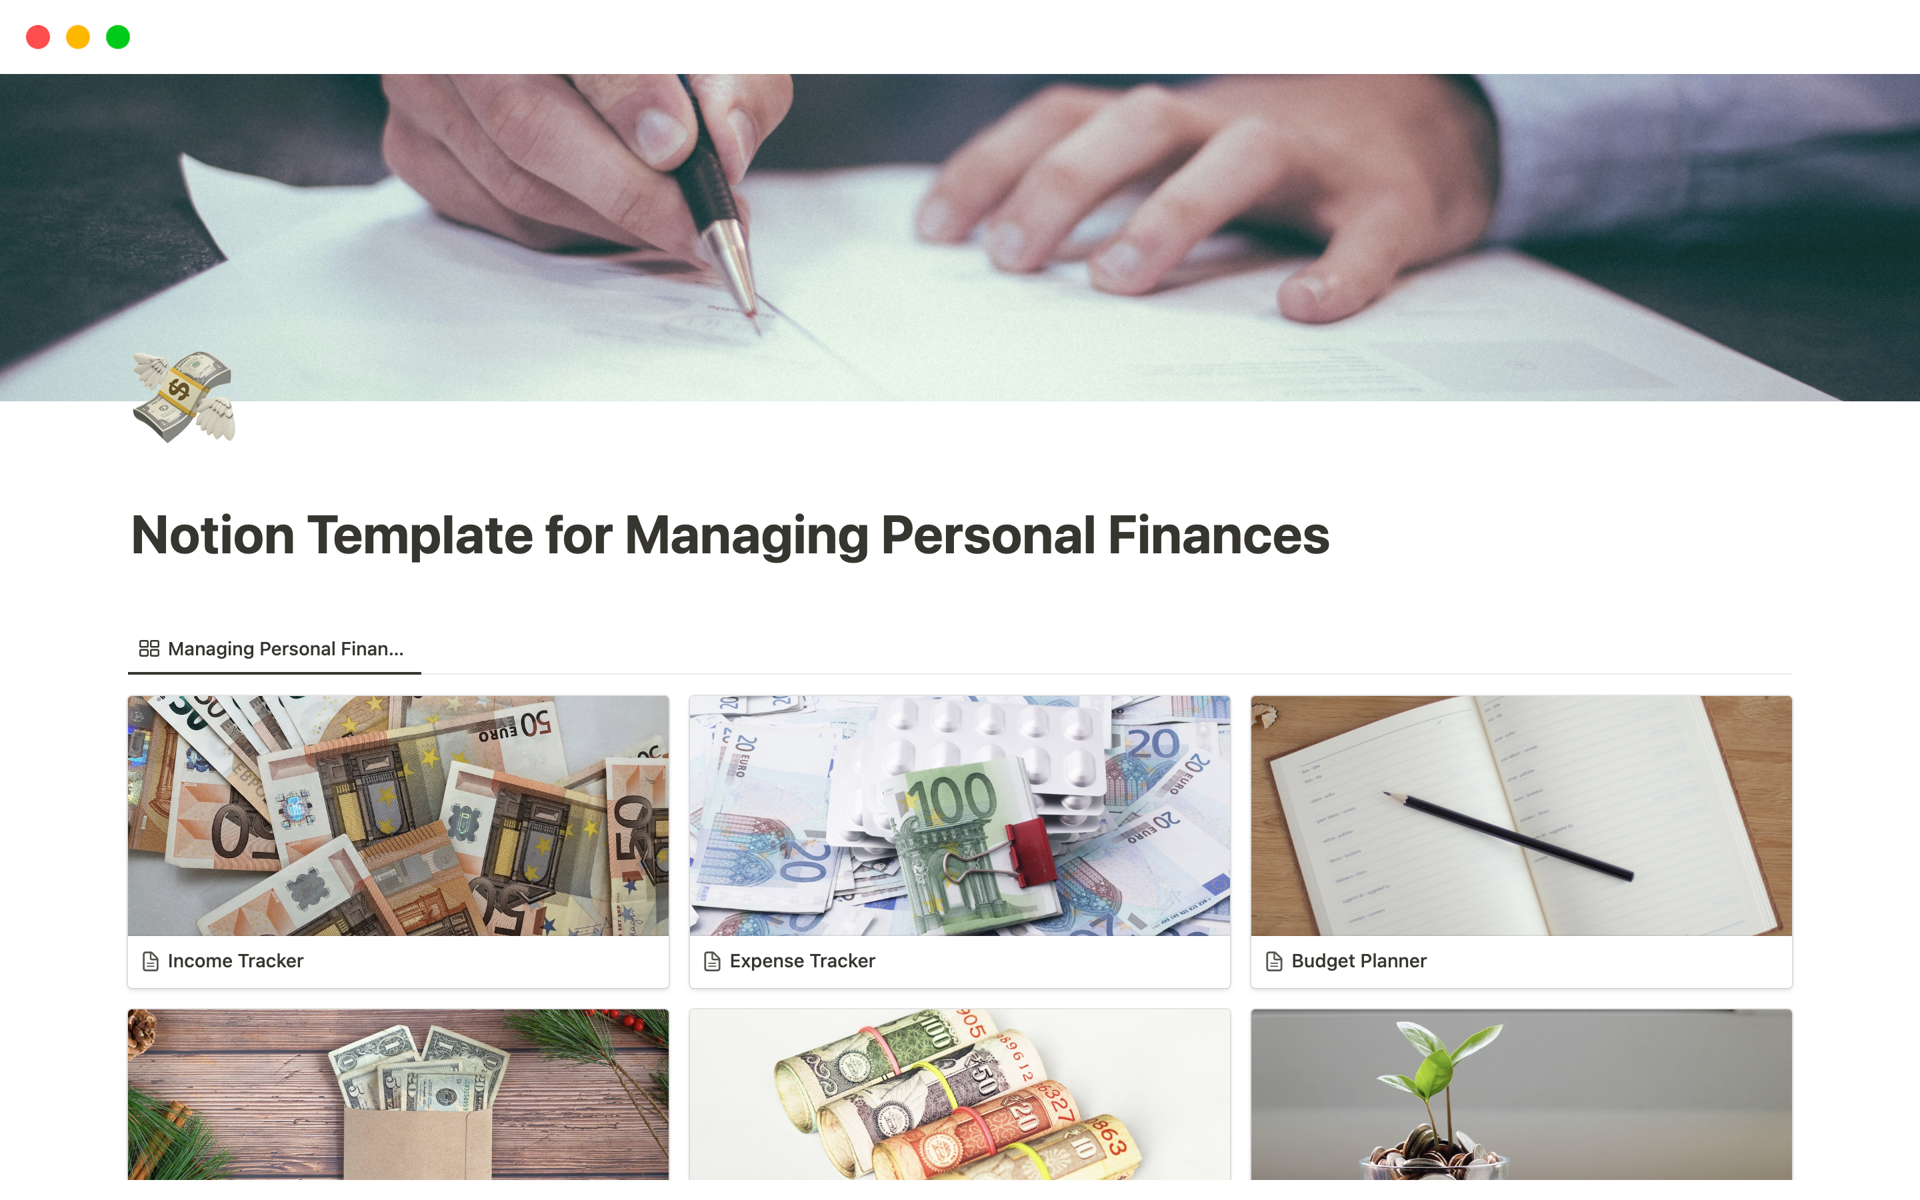 Take charge of your finances effortlessly with our "Personal Finance Notion Template." Track income, expenses, budgets, savings goals, debts, and net worth in one convenient place. Gain financial clarity and make informed decisions. Unlock financial success today!